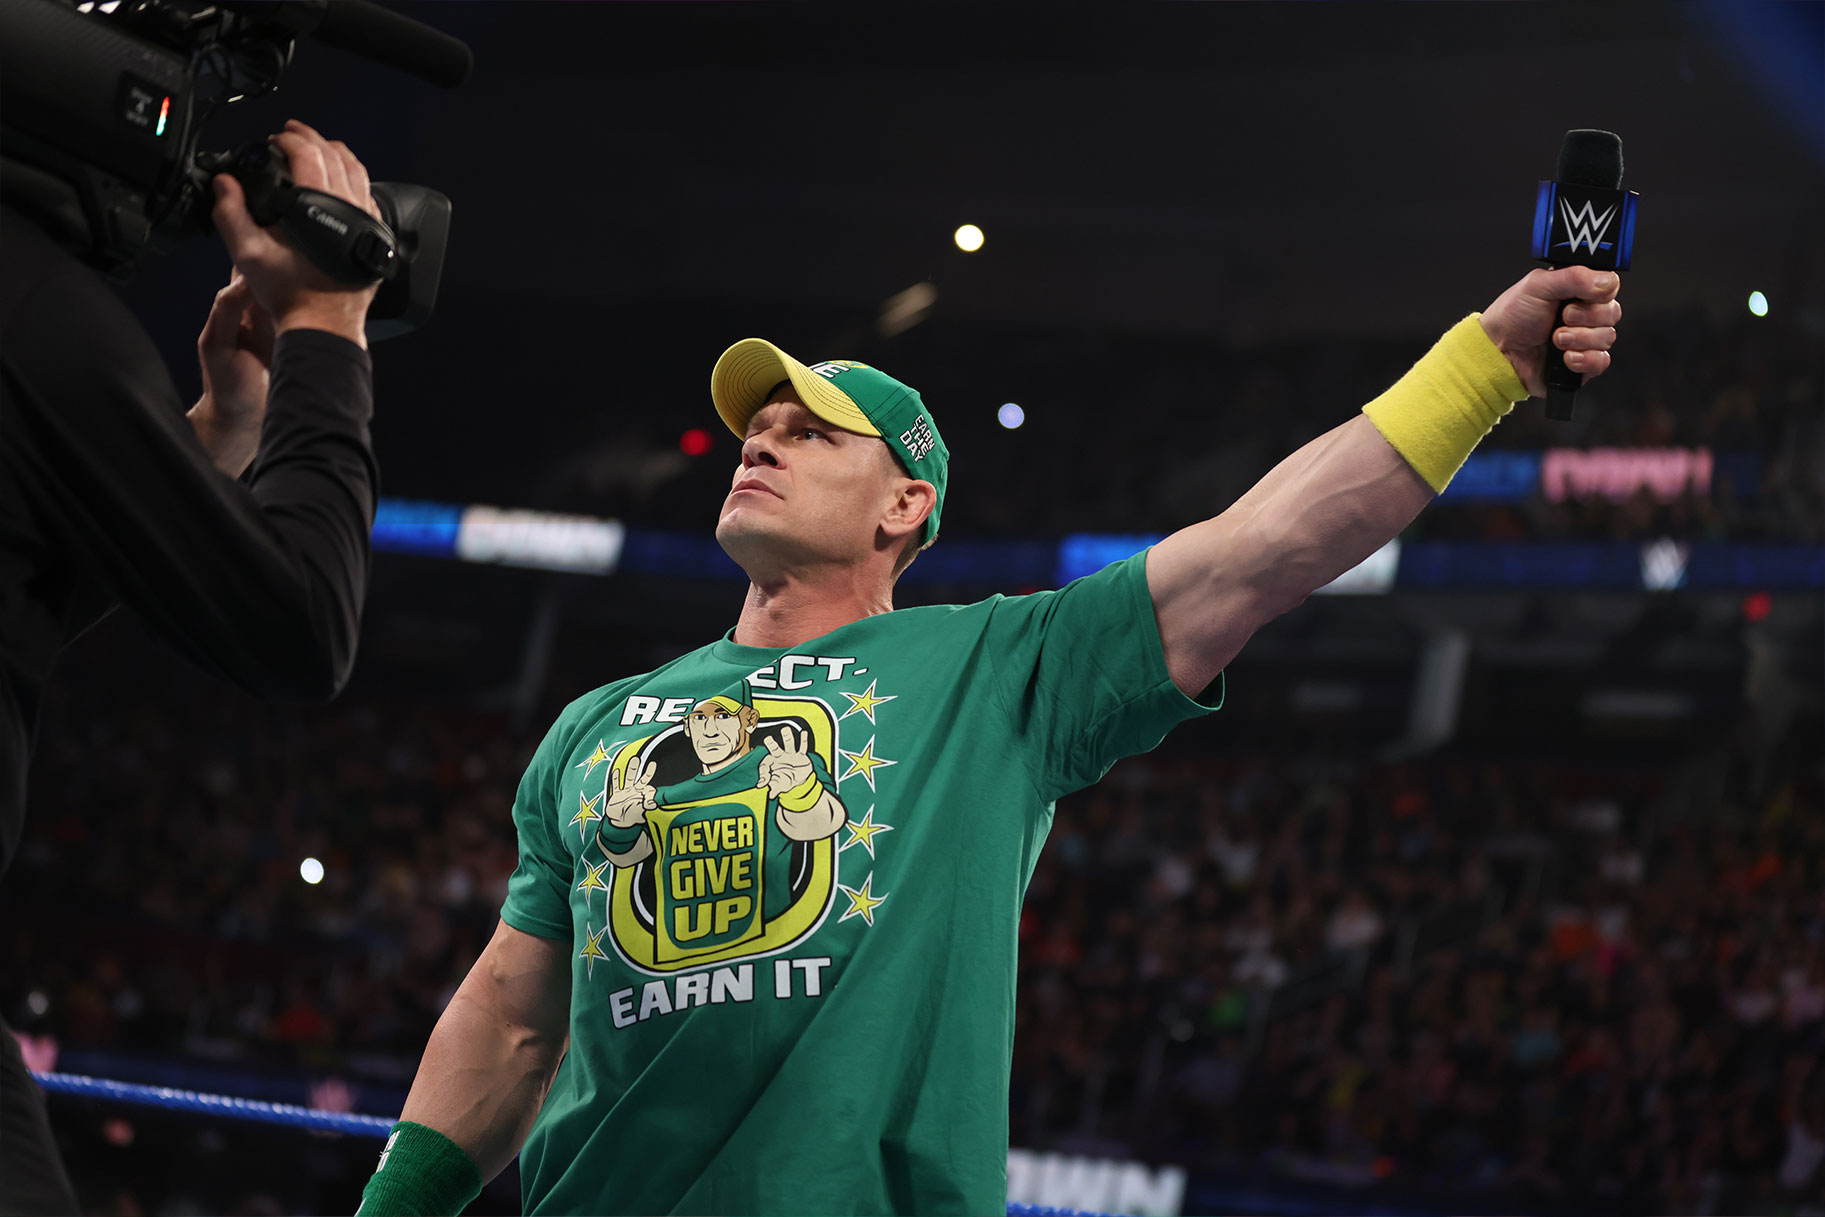 John Cena holding a mic out to the crowd while standing in the ring